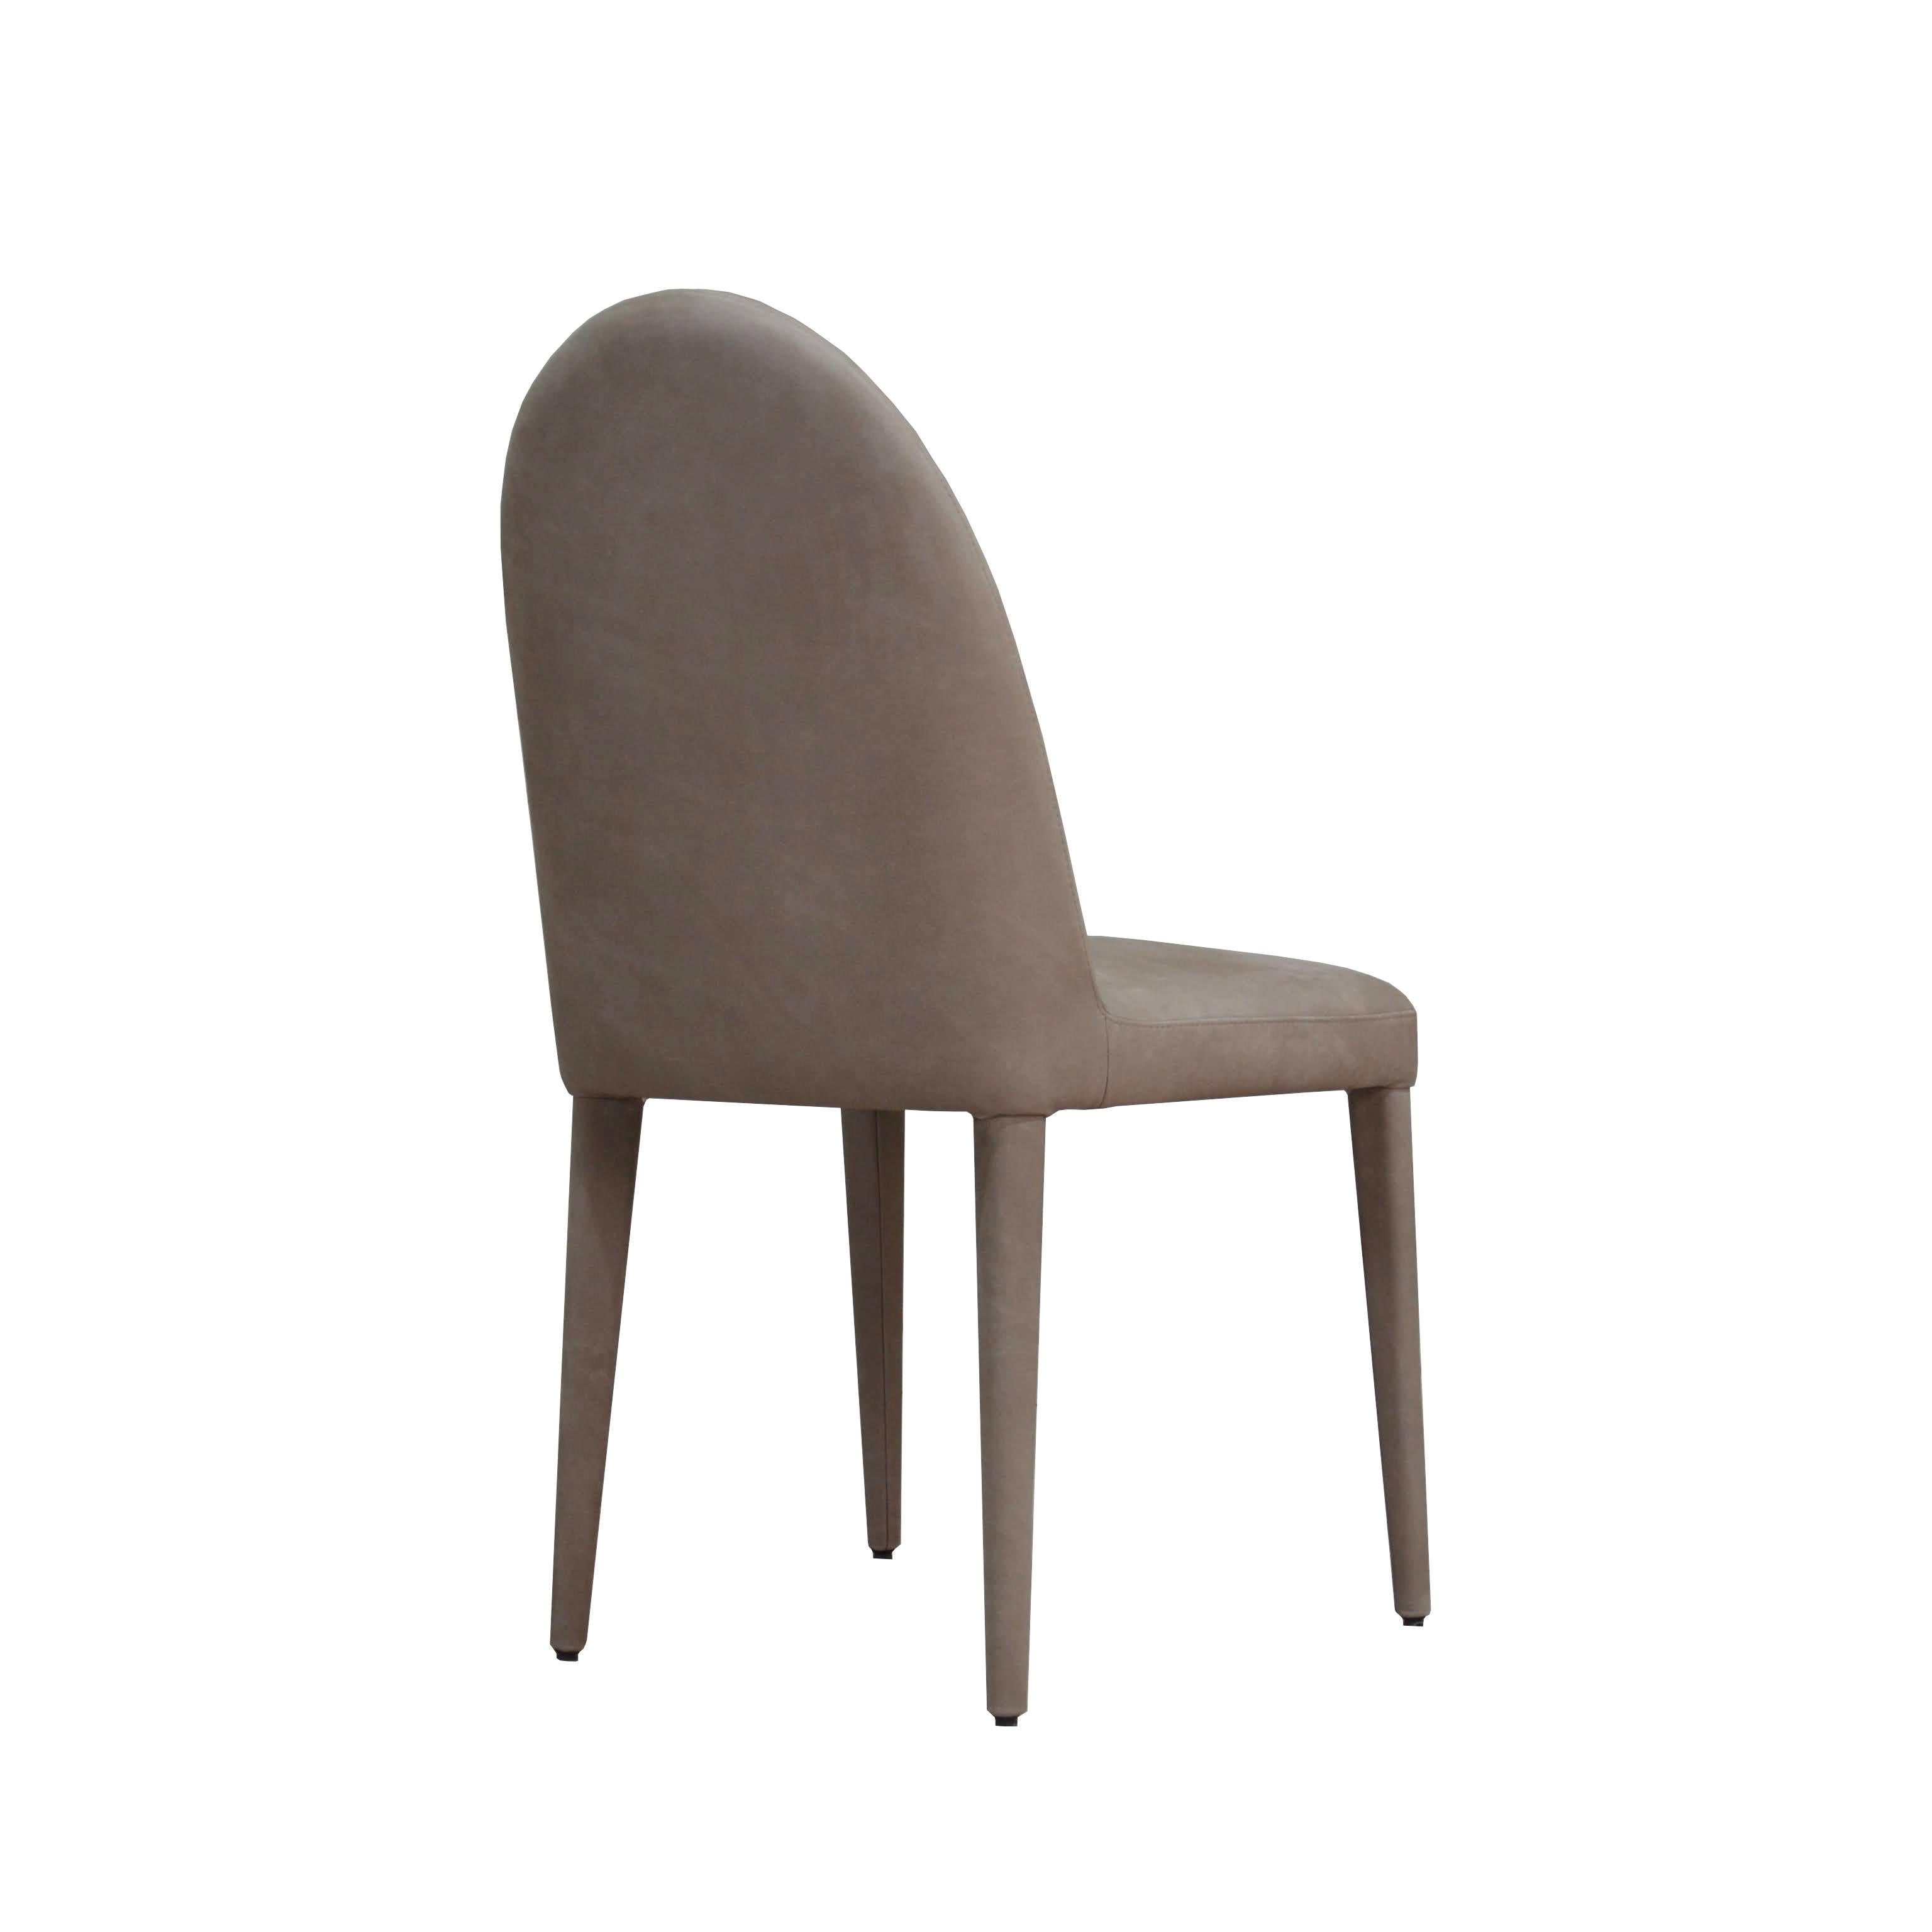 Modern ‘Balzaretti’ Xl Contemporary Upholstered Dining Chair in Taupe Leather For Sale